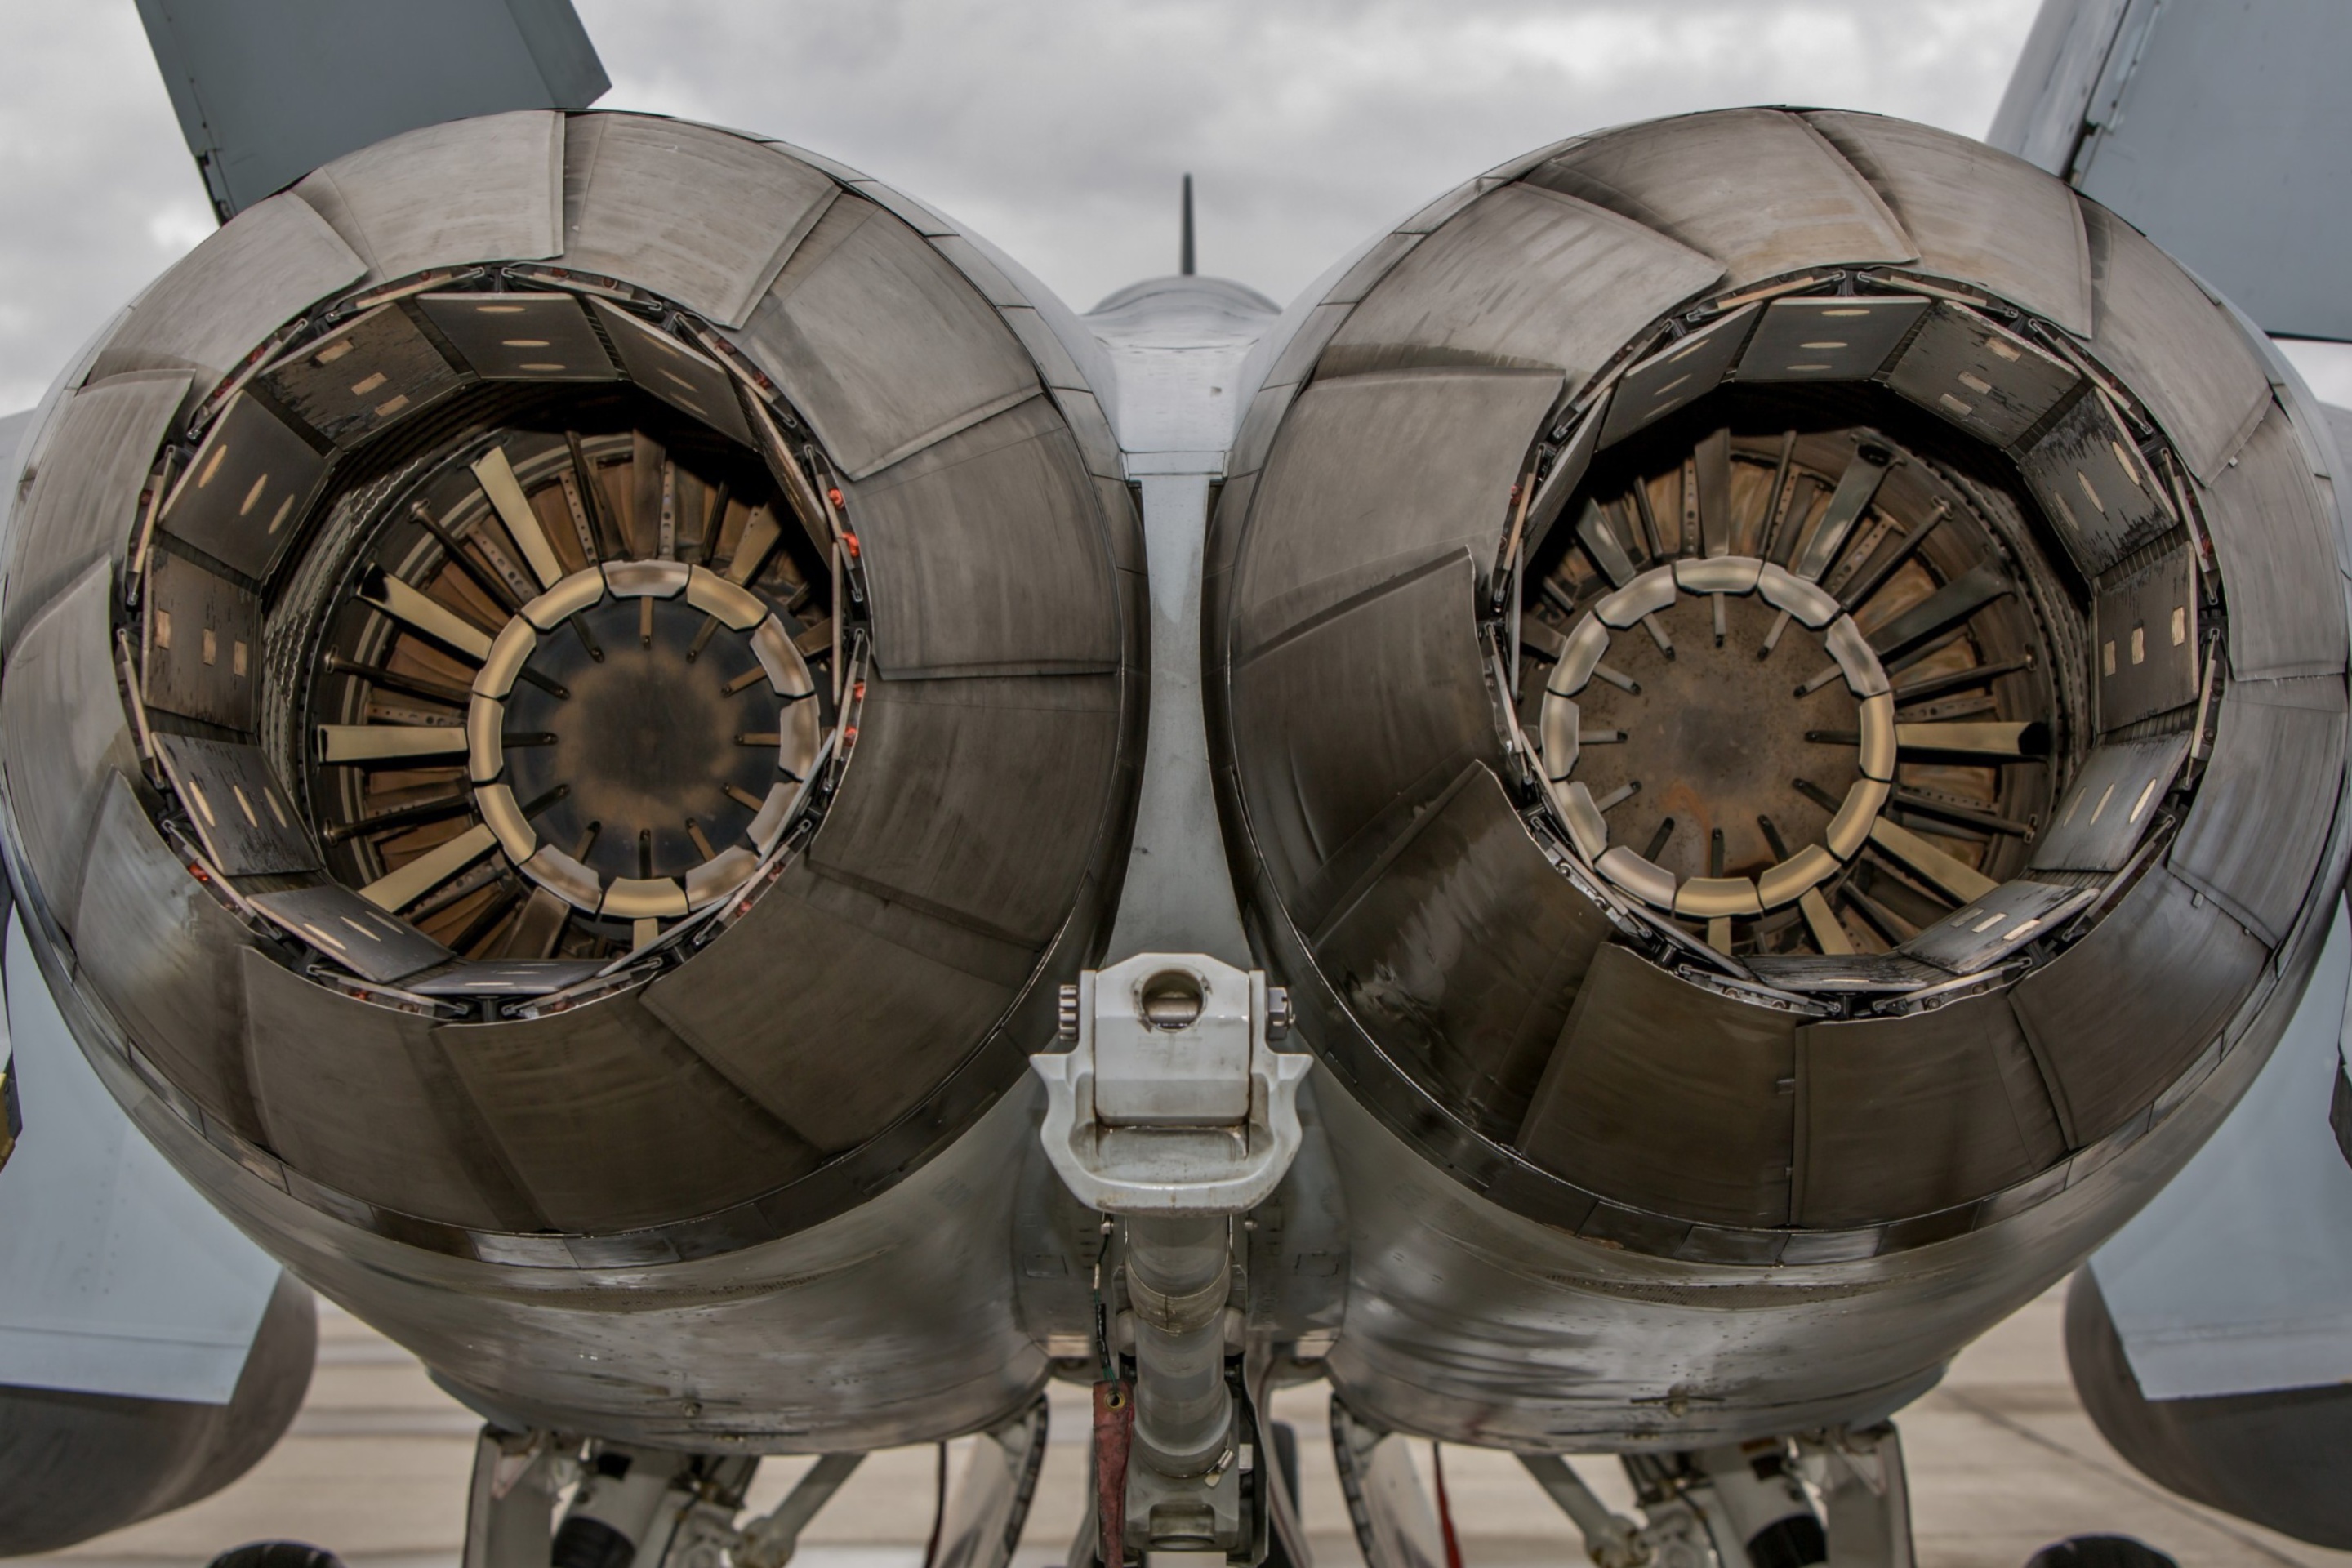 Das Military Fighter Engines Wallpaper 2880x1920